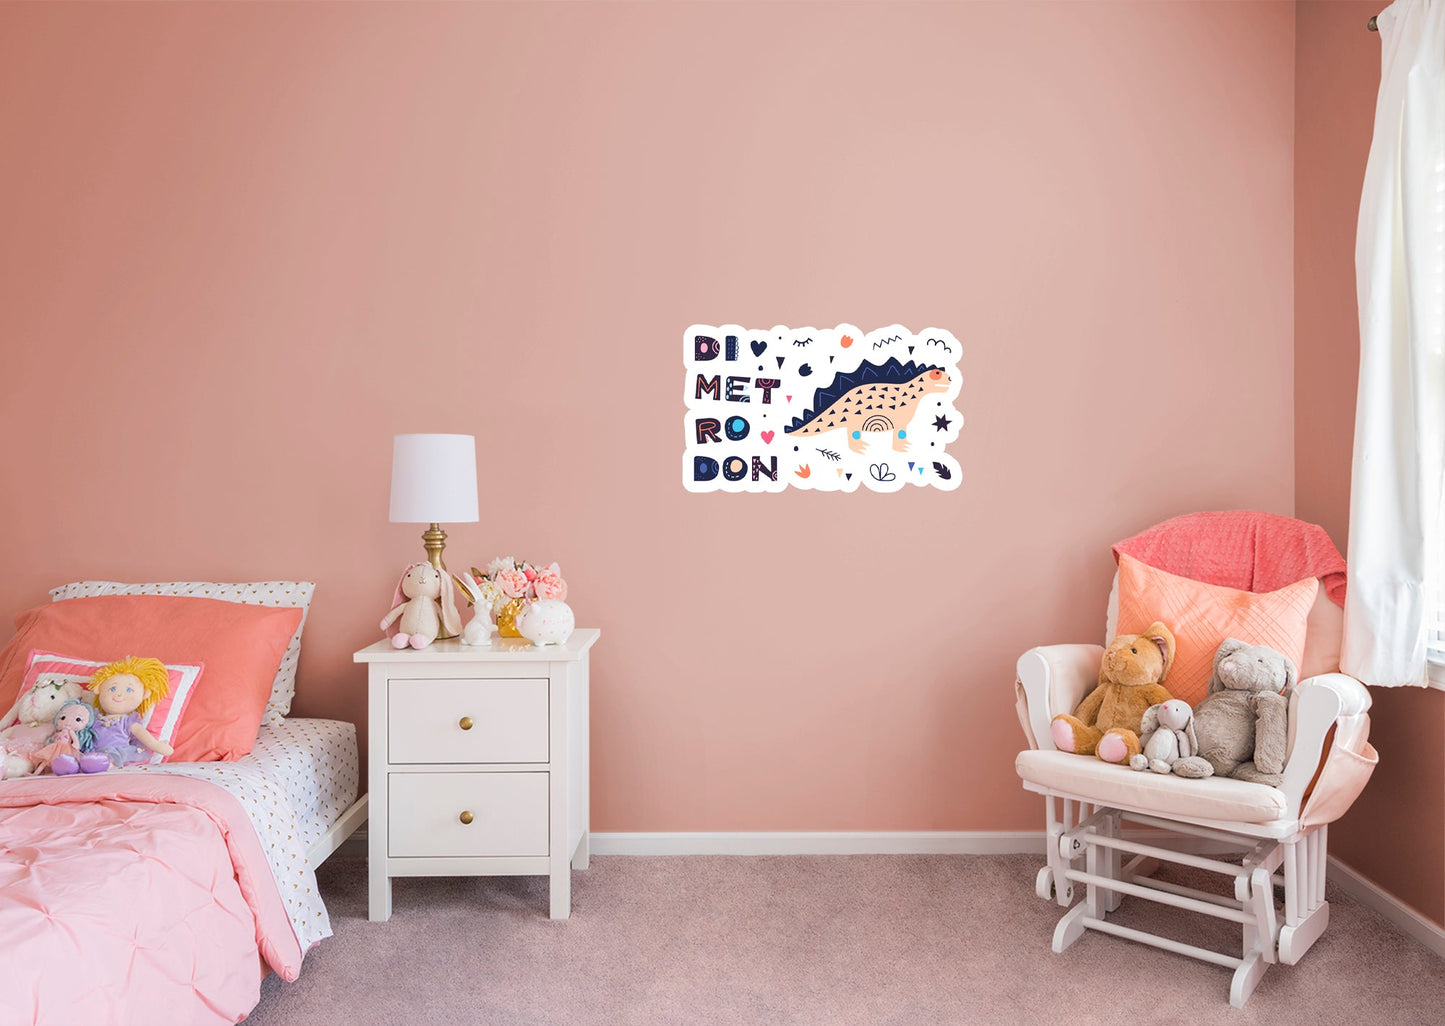 Dinosaurs: Dimetrodon Icon        -   Removable Wall   Adhesive Decal